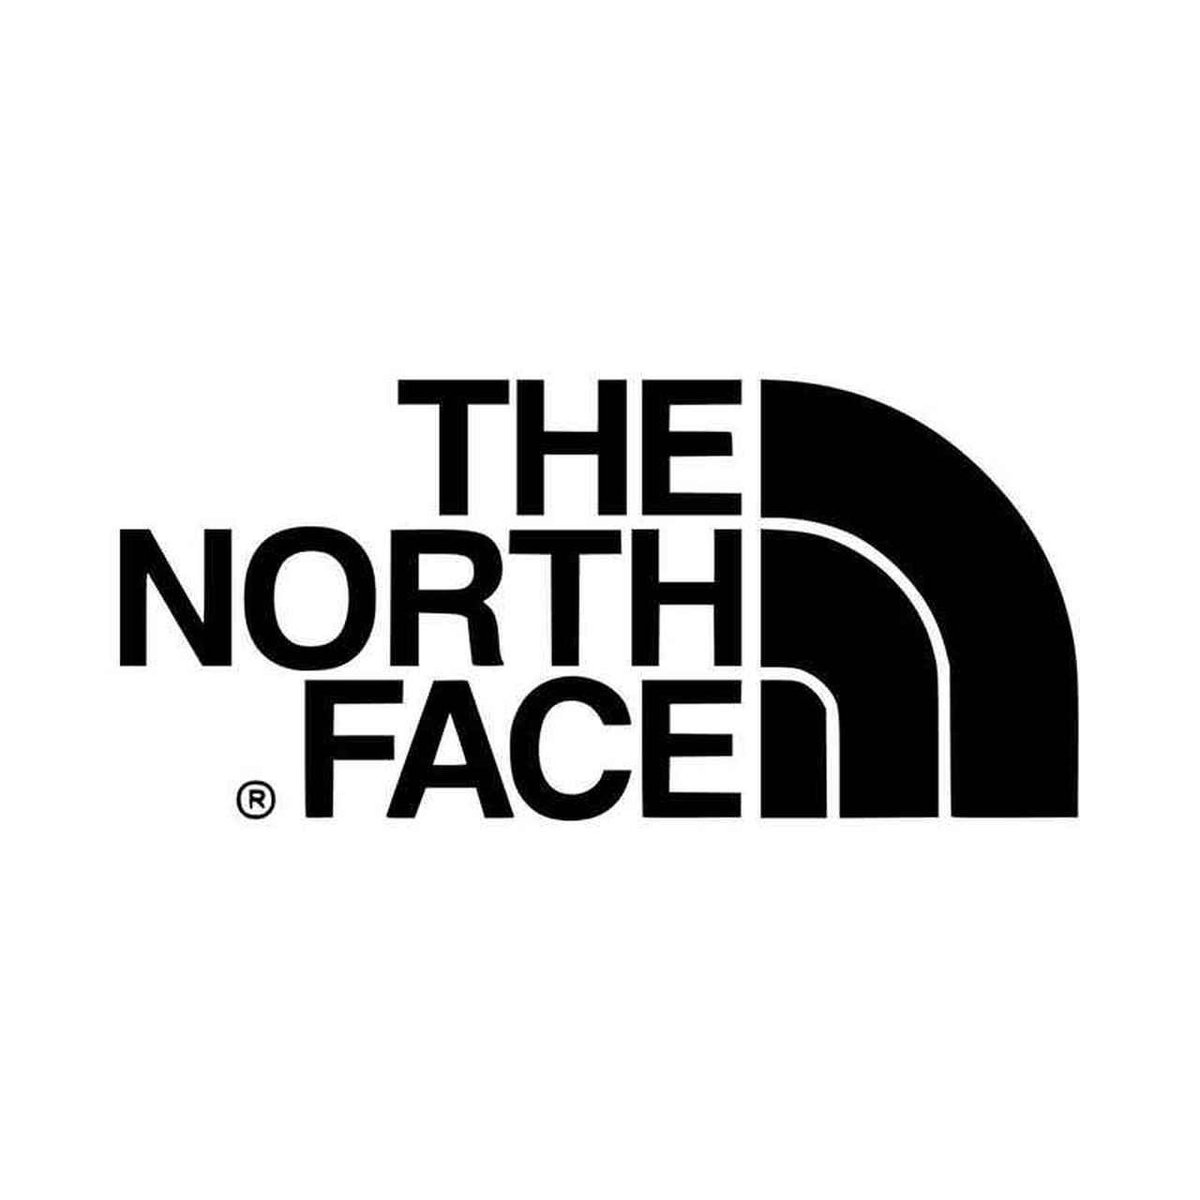 40% OFF + free shipping on The North Face apparel SHOP HERE: bit.ly/2RlFcoA